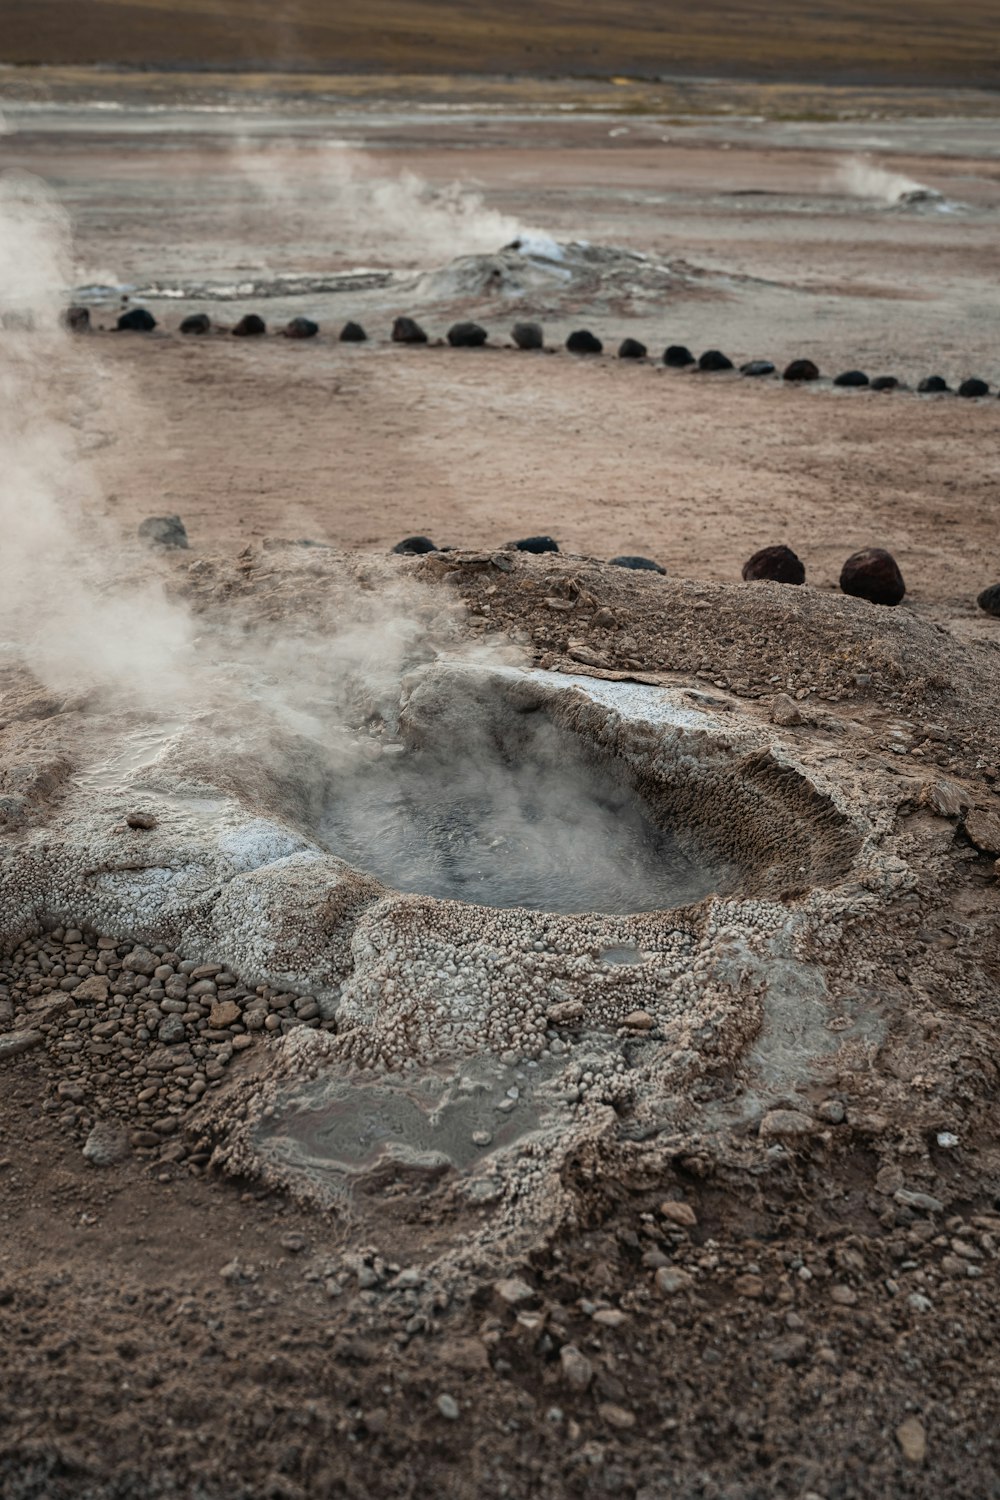 a hot spring in the middle of a barren area